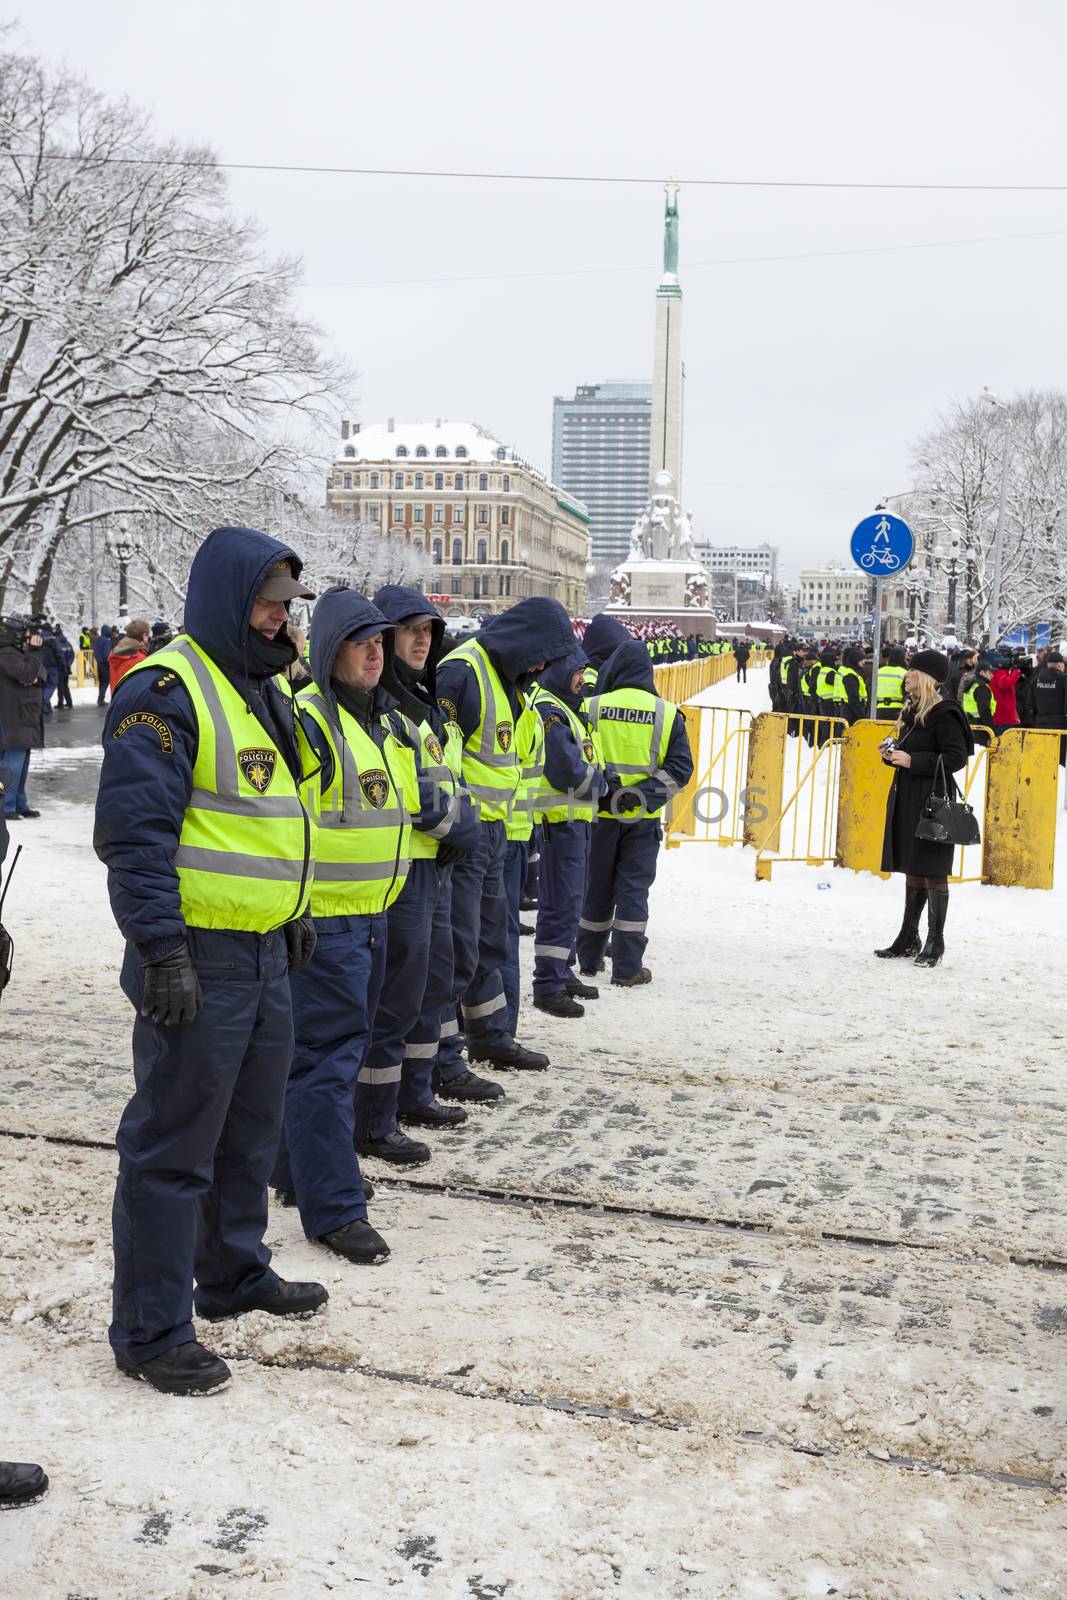 Police cordon near Freedom monument in Riga by ints